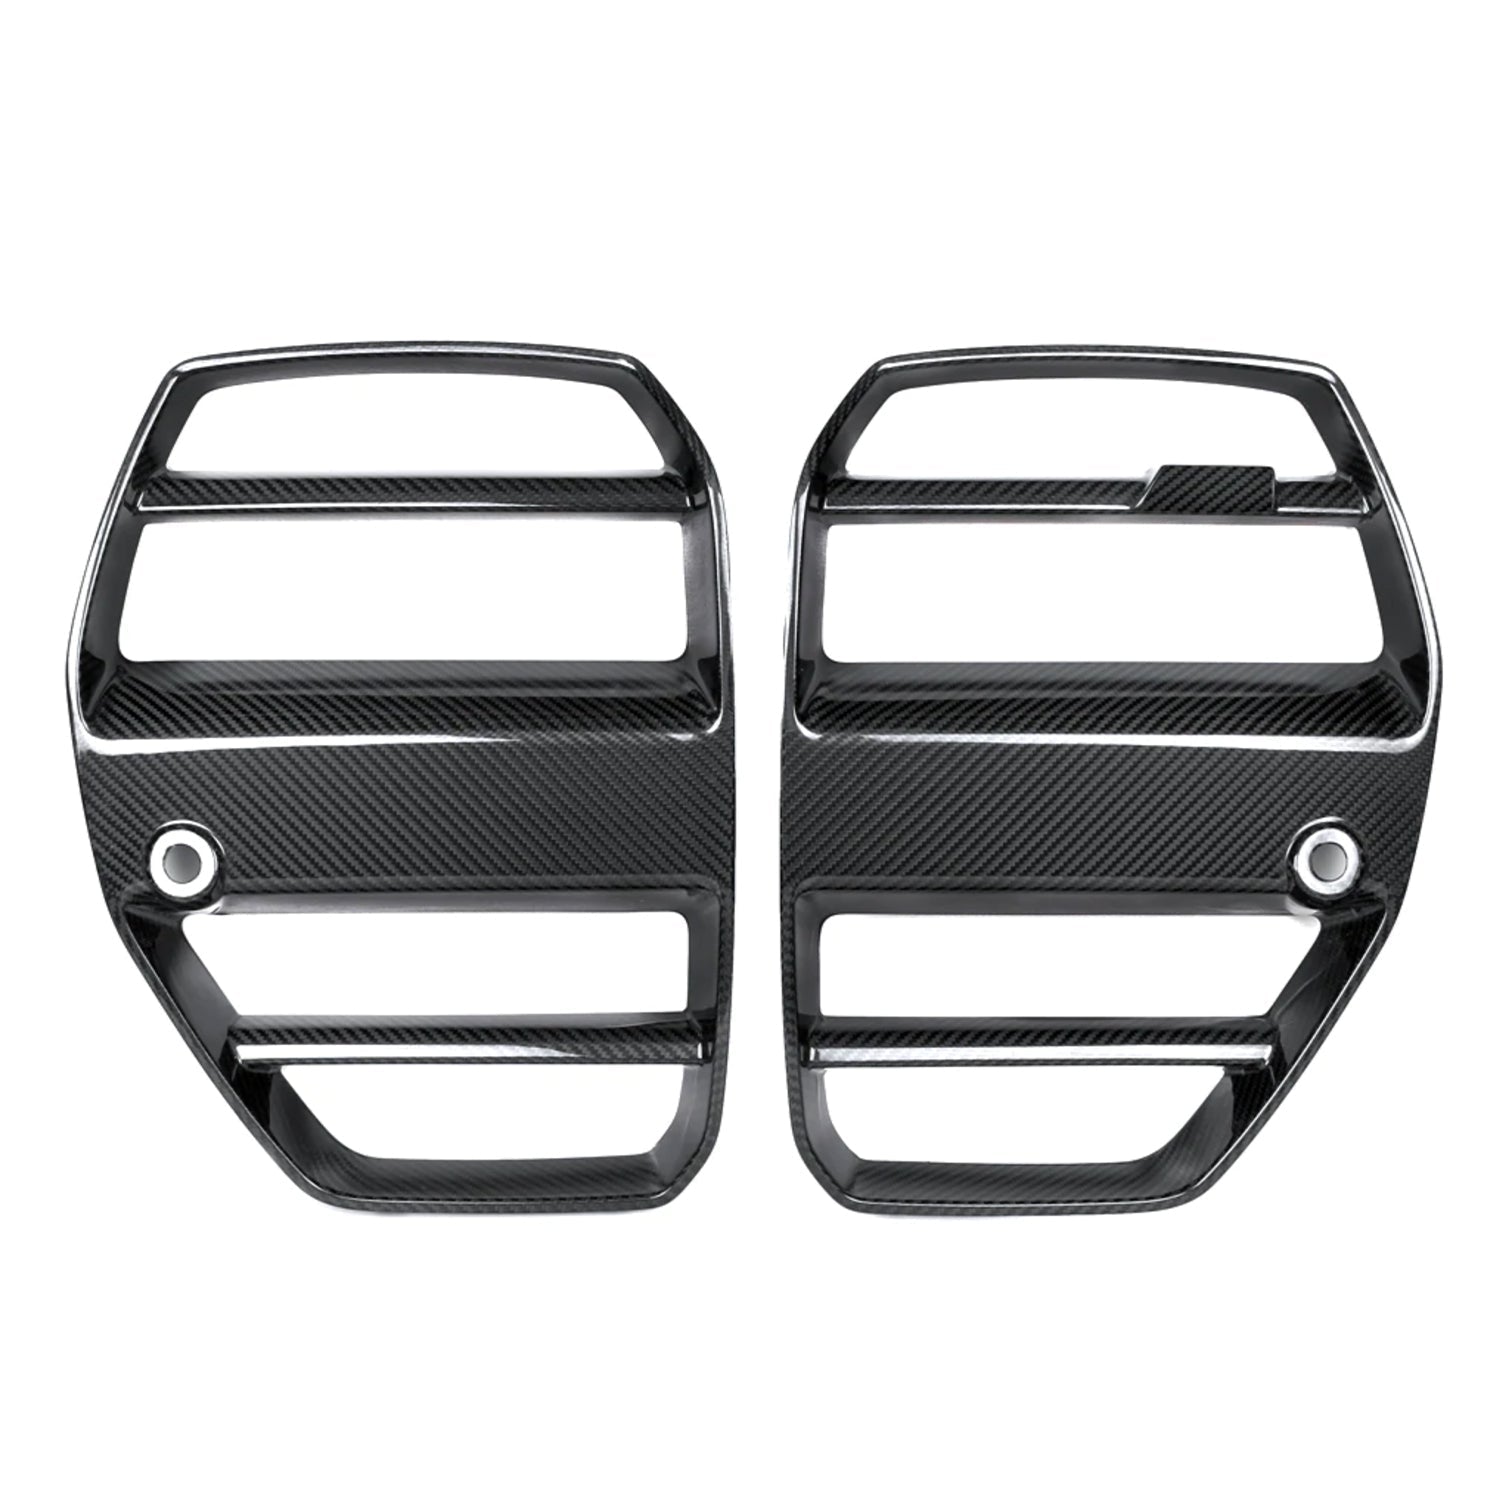 R44 Performance MHC+ BMW M3/M4 GT-STYLE FRONT-GRILLE IN PRE-PREG